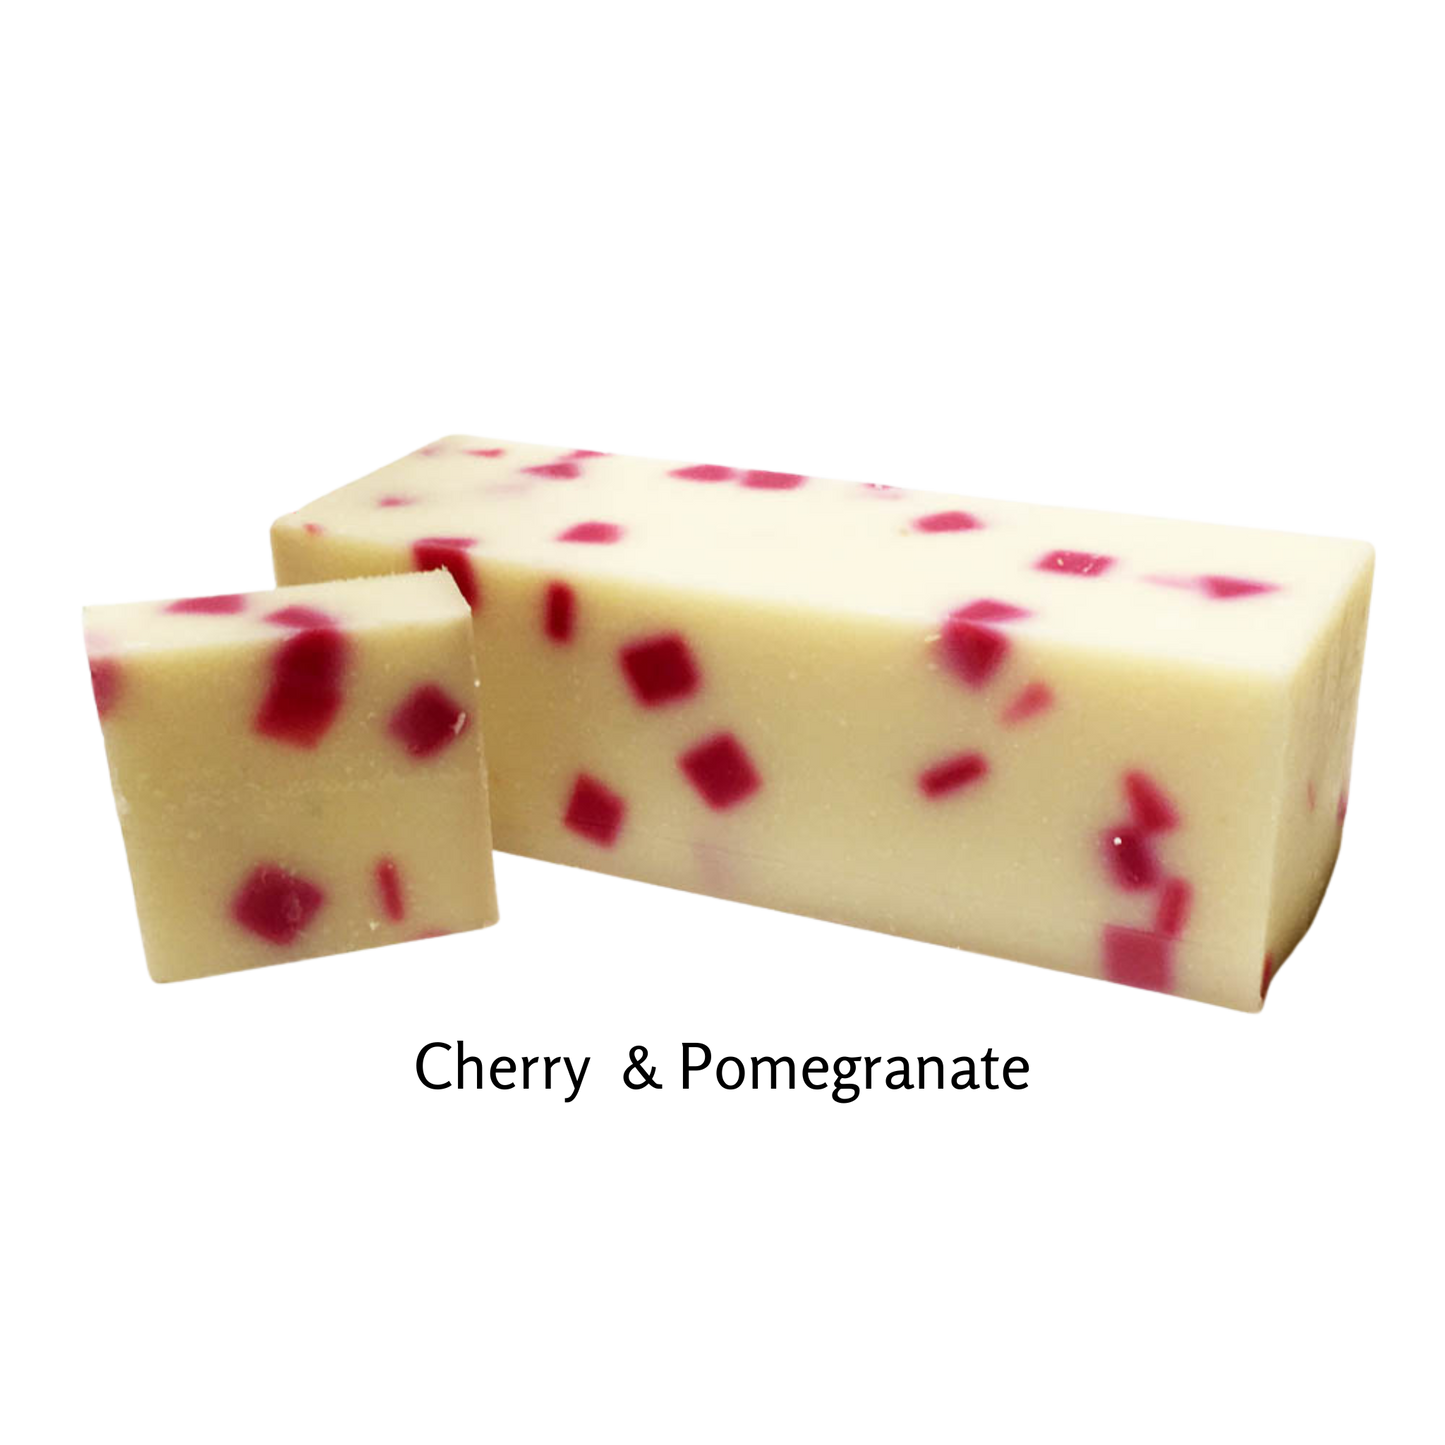 Wild cherries blended with pomegranate and touches of tangerine and other citrus.  4.5 oz